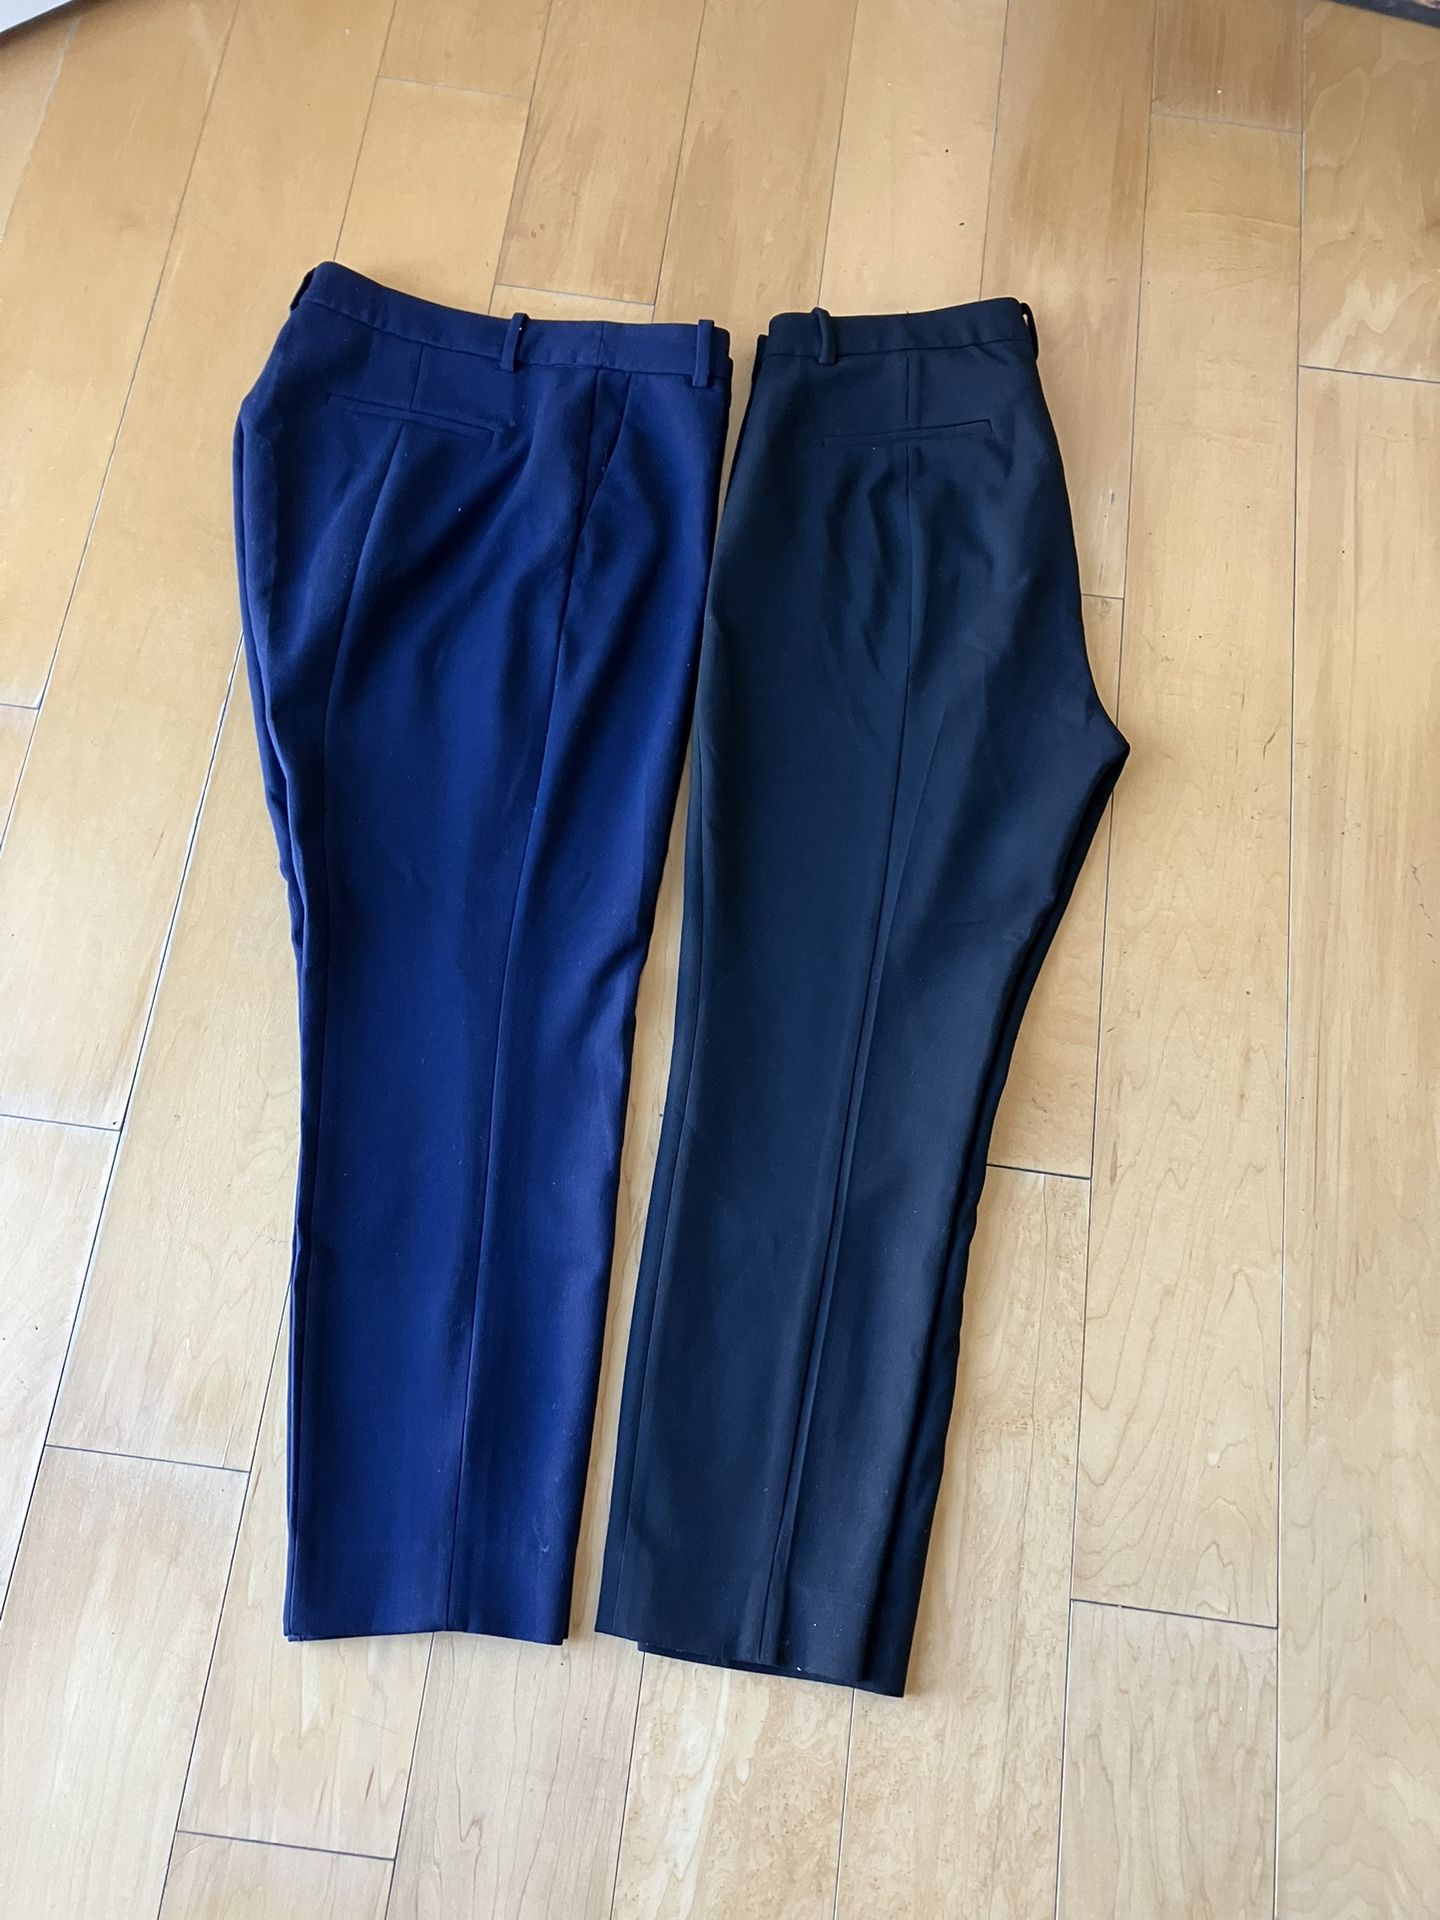 J Crew Pants size 12 HighRise Cameron Together or Separate